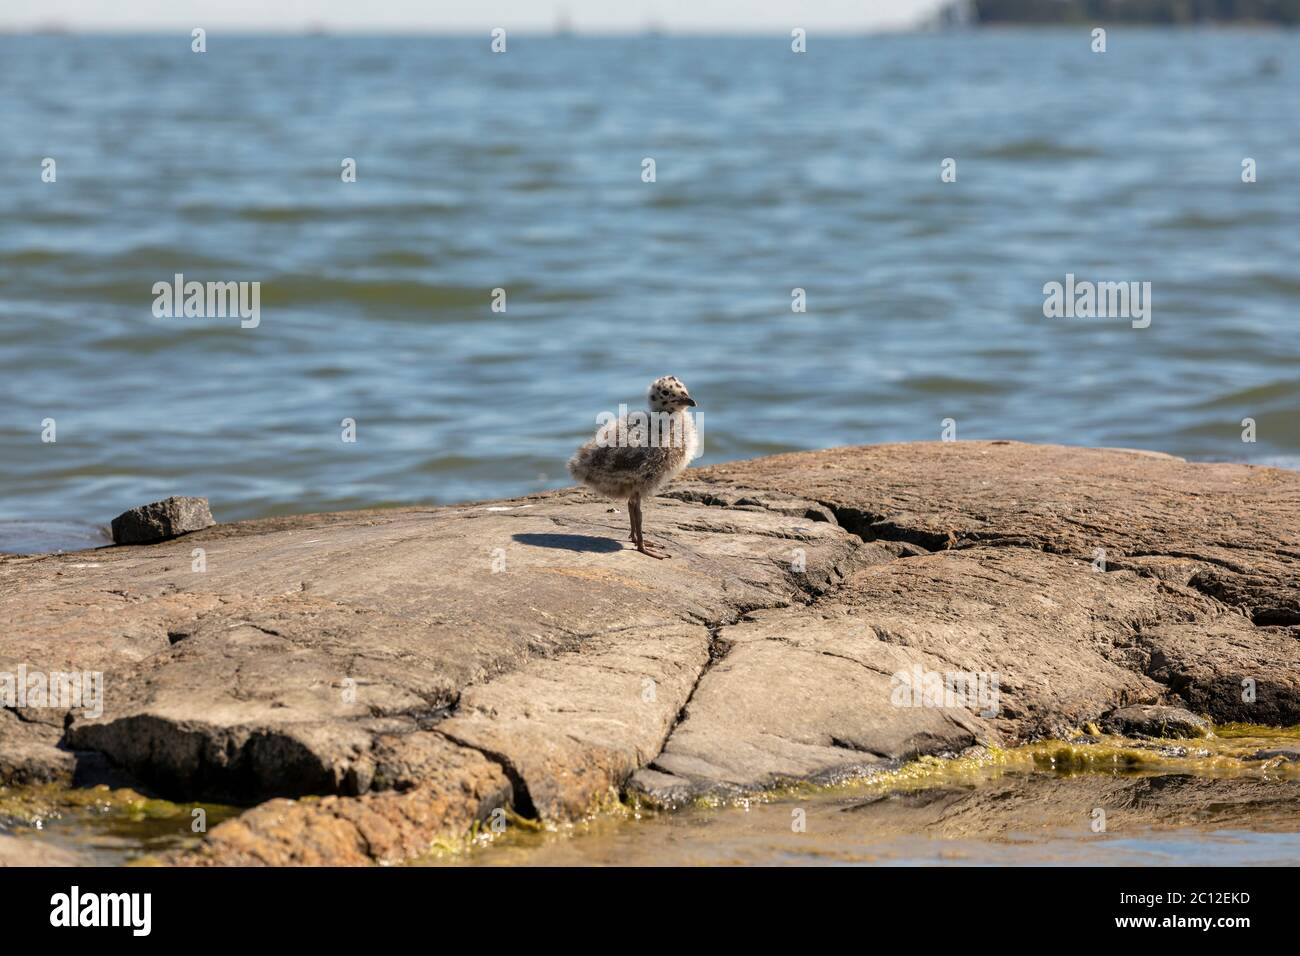 One seagull nestling standing on granite rock in Finland Stock Photo